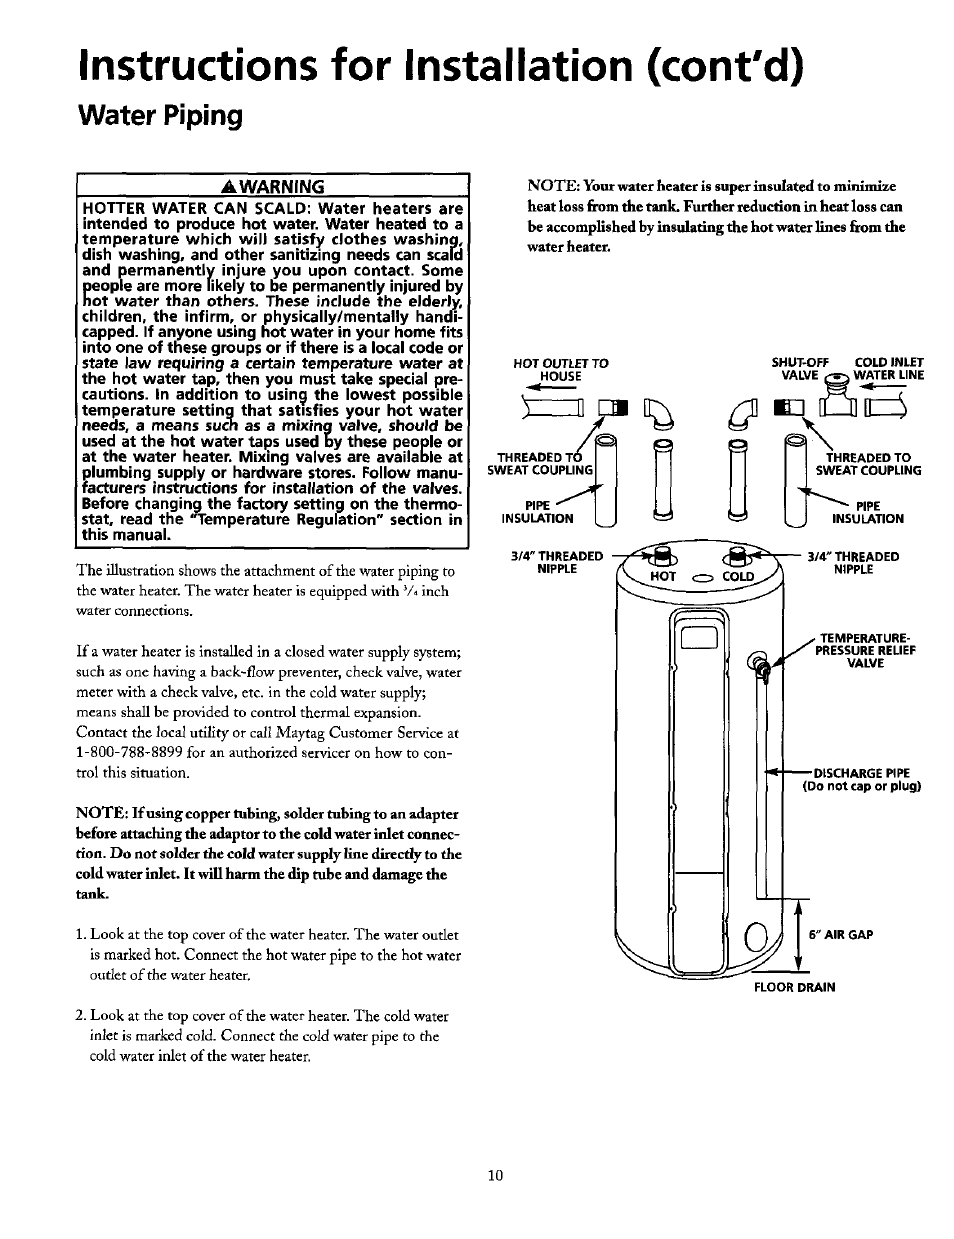 Instructions for installation (cont'd), Water piping, Instructions for installation | Maytag HE21250PC User Manual | Page 10 / 40